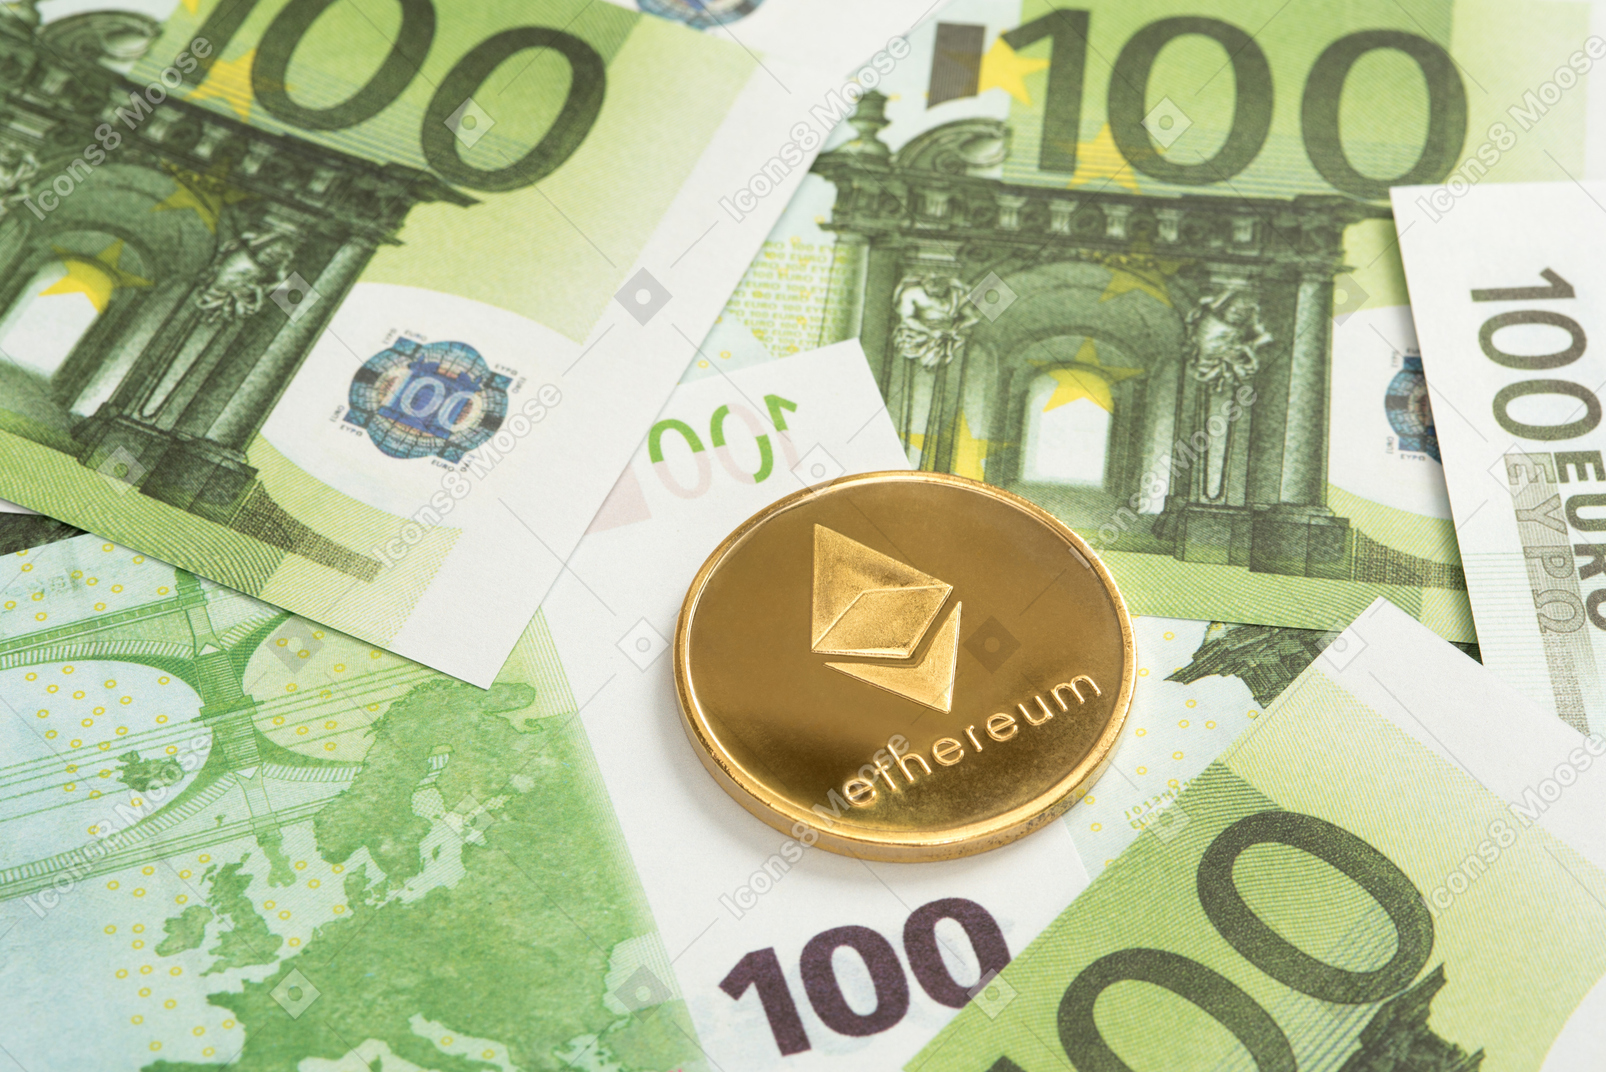 Ethereum coin on one hundred euro banknotes